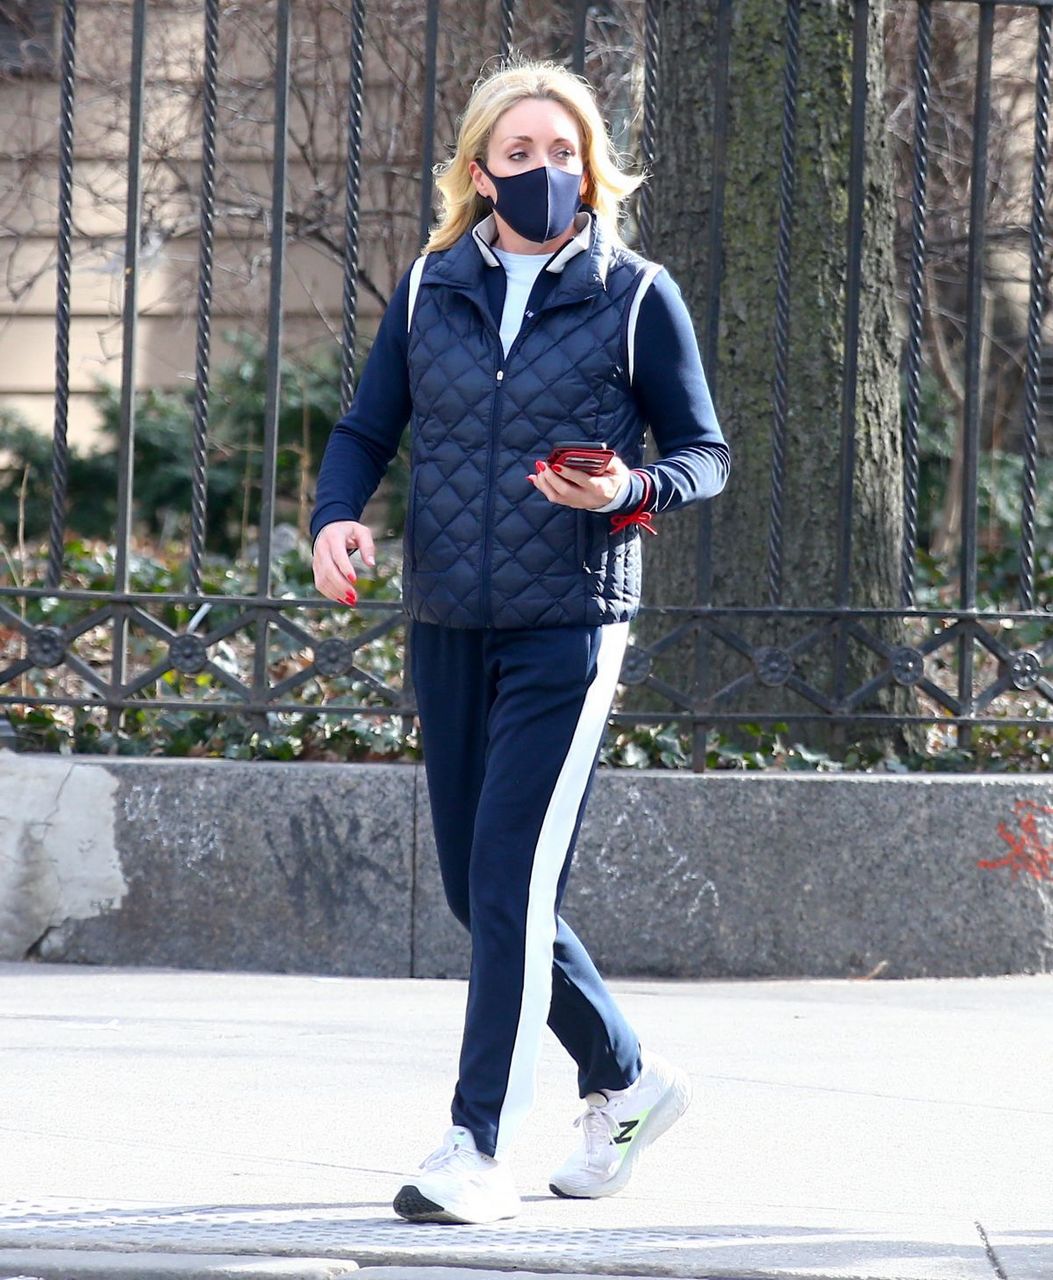 Jane Krakowski Out And About New York